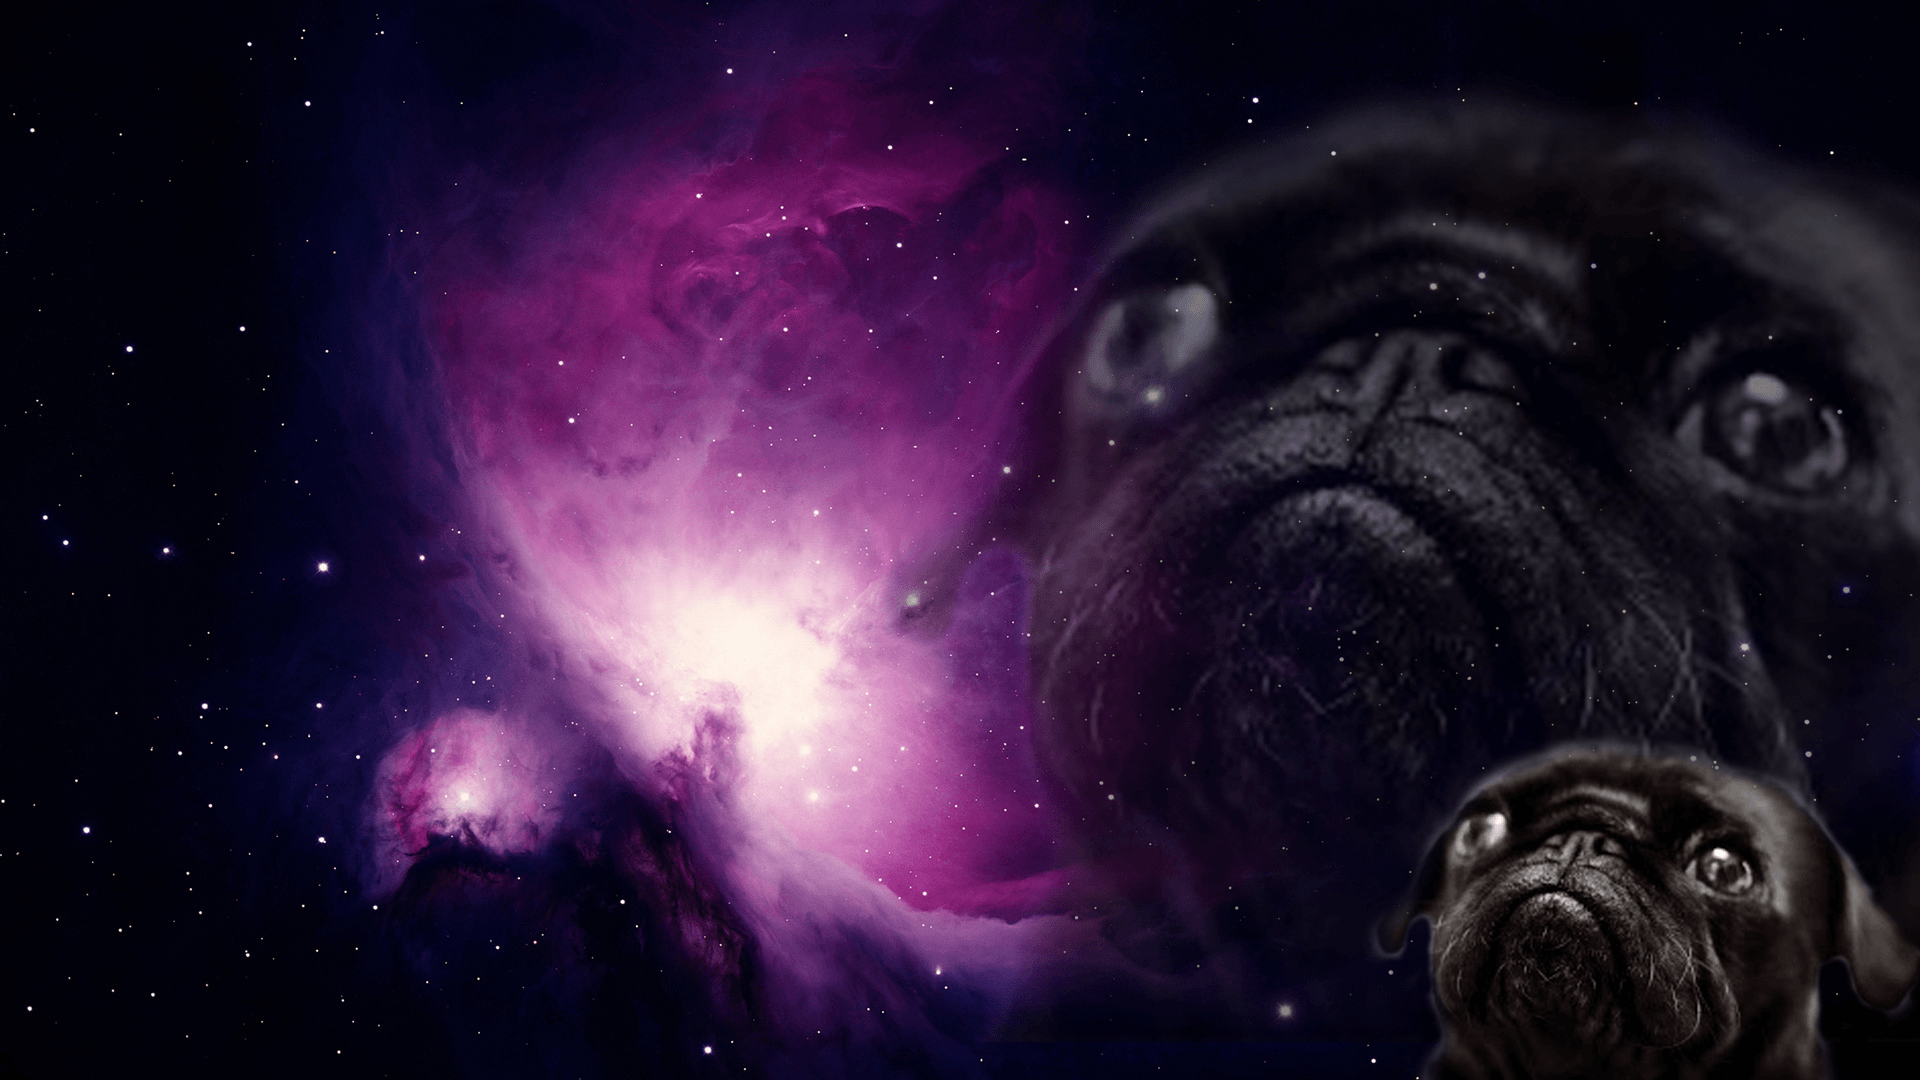 Pug in space wallpaper